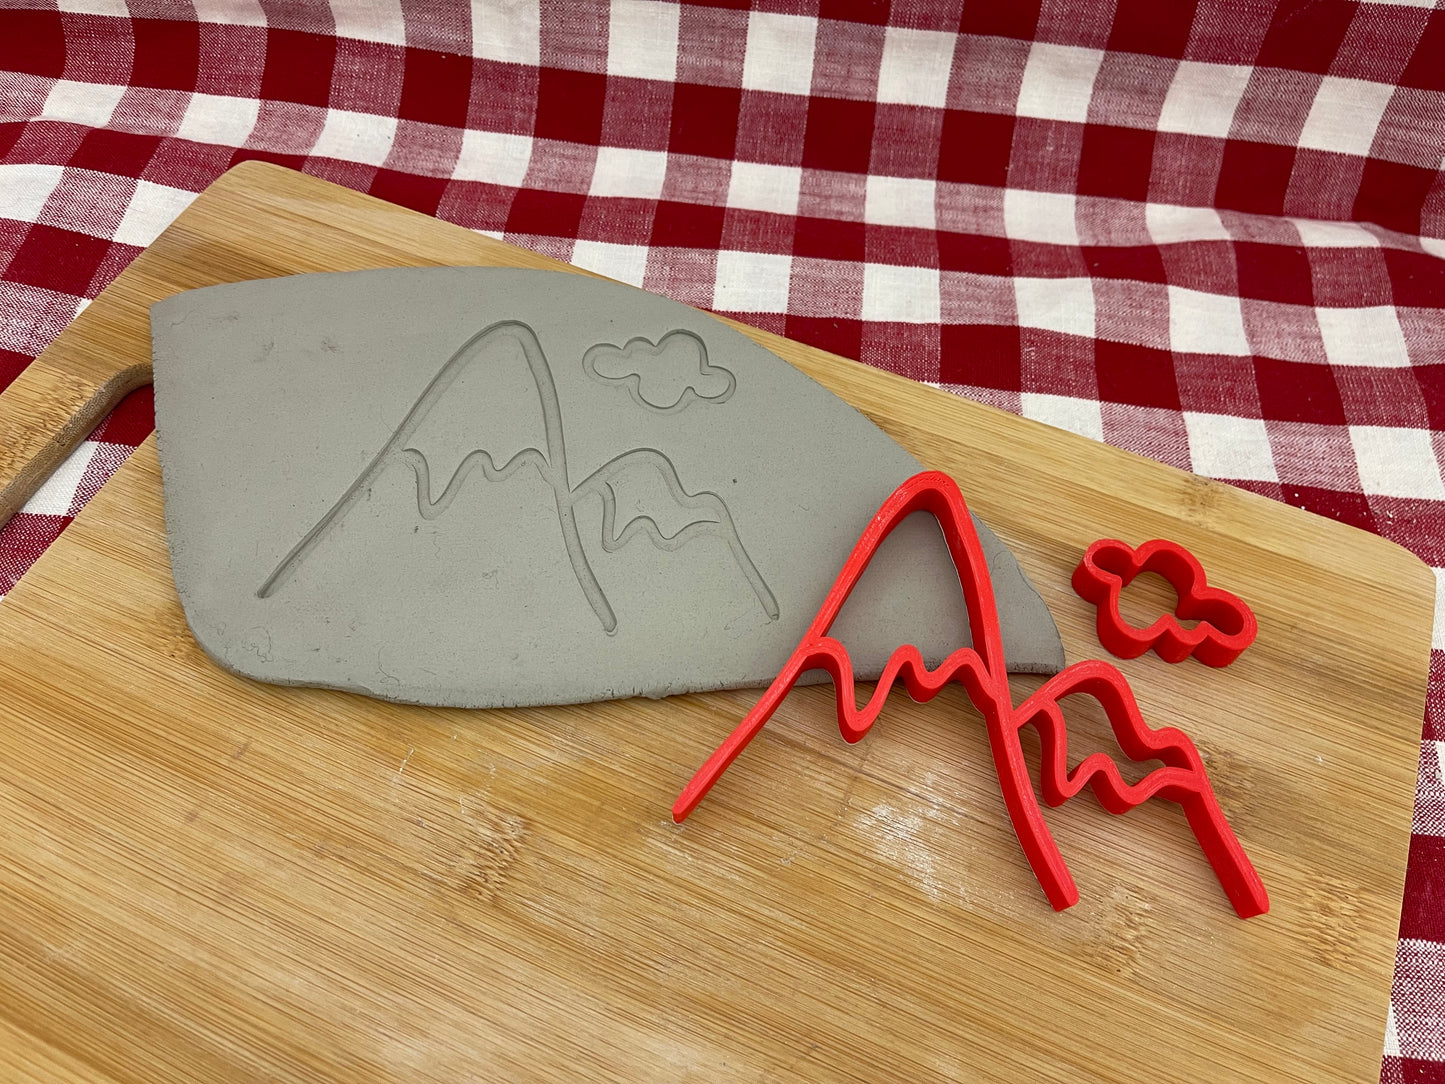 Pottery Stamp, Mountain w/ cloud design, Camping doodle series - multiple sizes